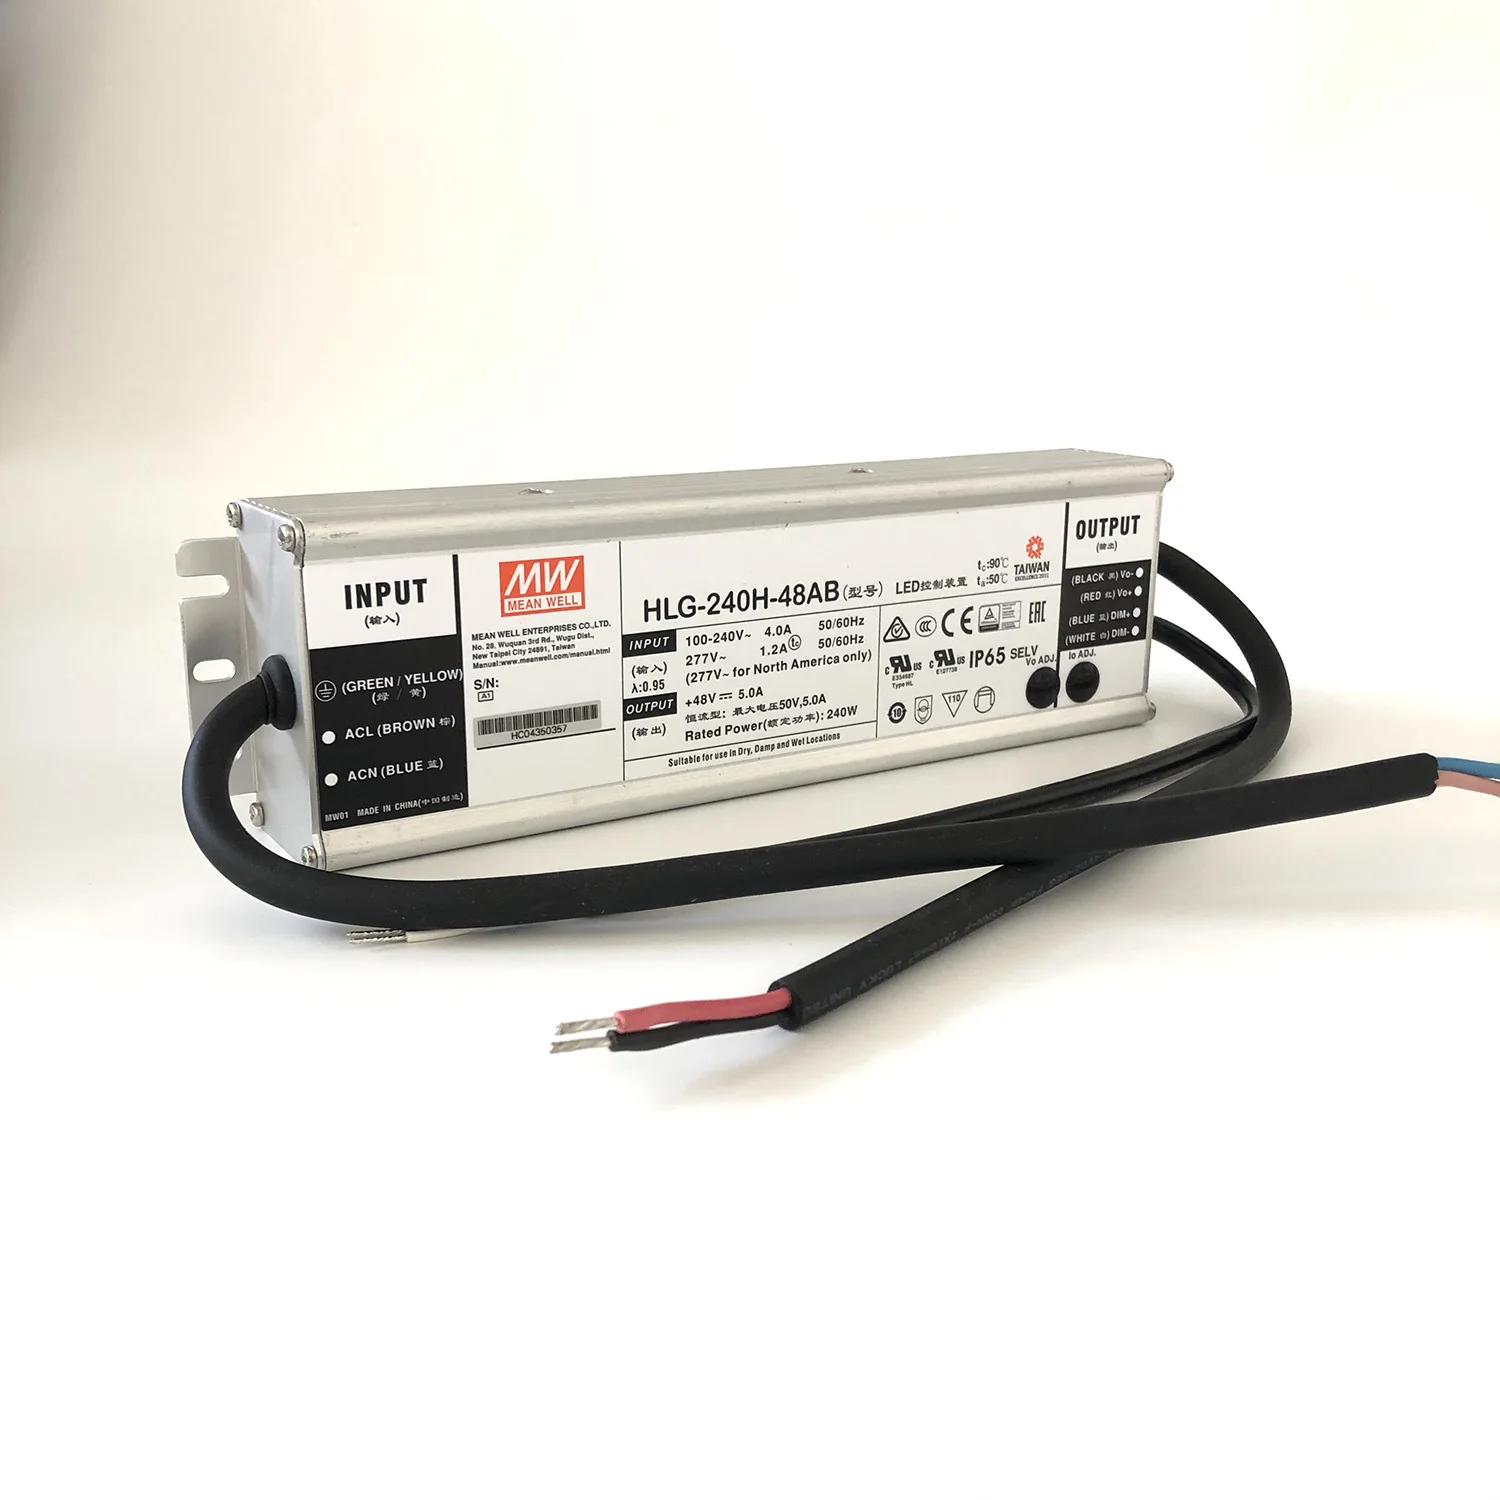 HLG-240H-48AB 240W Meanwell  AC-DC Single output LED Driver Mix Mode (CV+CC) with PFC; Output 48Vdc at 5A